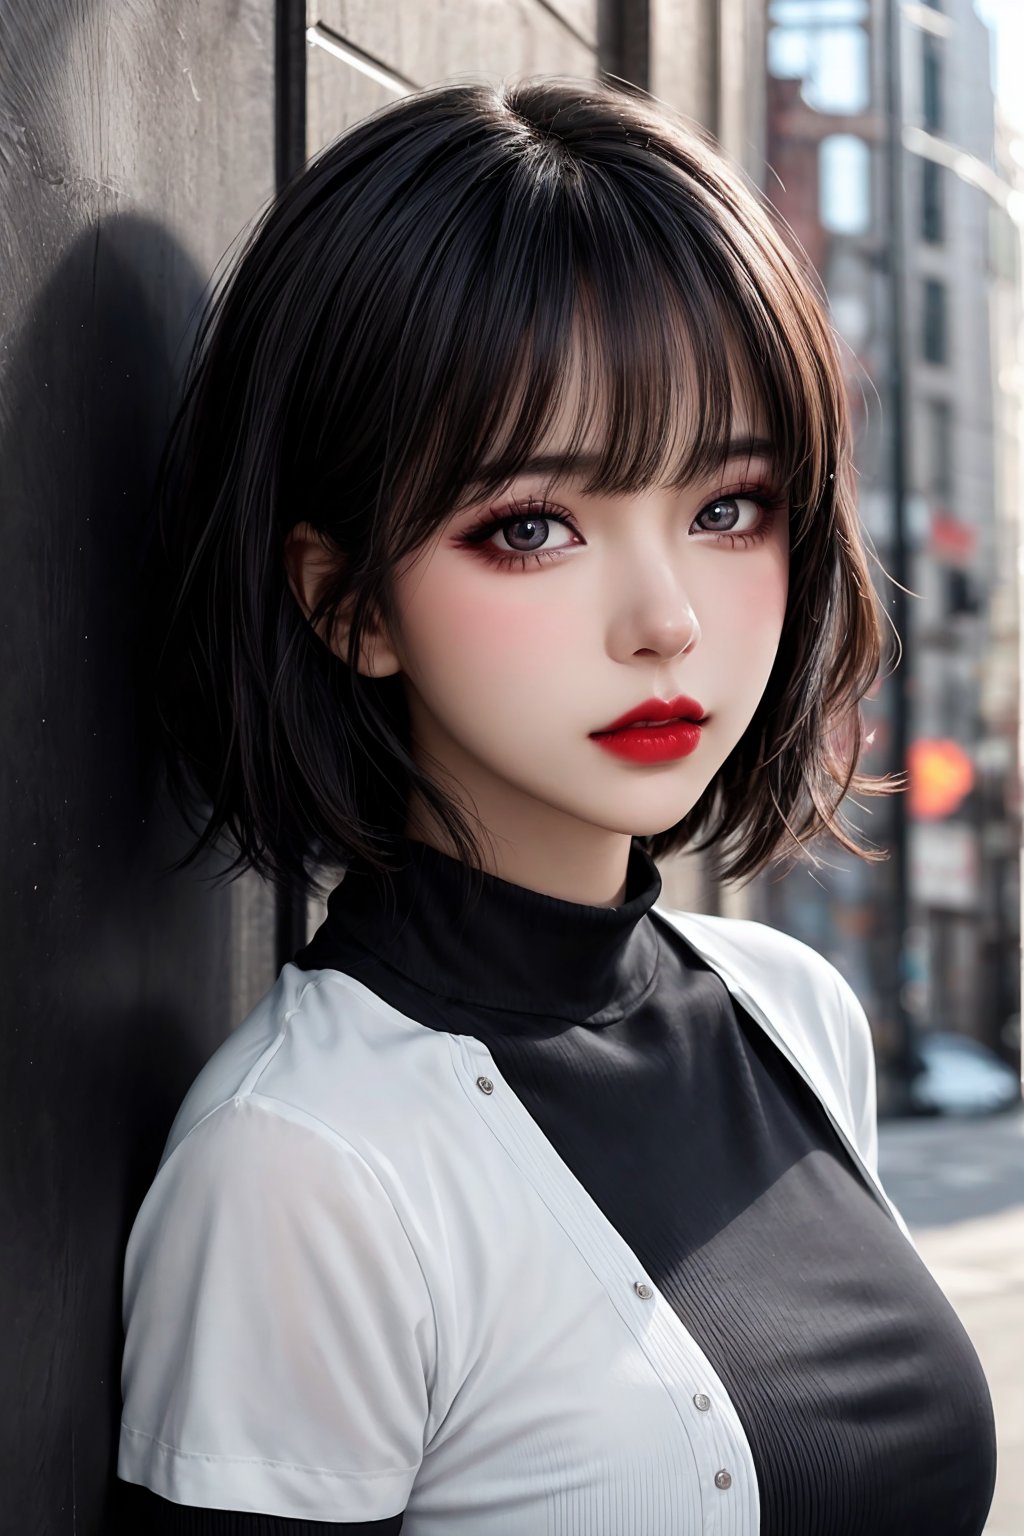 A stunning illustration of a solo girl standing up with an aesthetically pleasing composition. The subject features slim physique, black hair in a bobcut style with bangs, and closed mouth expression. Her eyes are mesmerizing, with dark red lipstick adding a pop of color. She wears a black shirt with short sleeves and a turtleneck, showcasing her beautiful upper body. The background is realistic, allowing the girl's features to take center stage. Her lips curve slightly upward, framing her delicate face with perfect anatomy, big eyes, and ultra-fine skin texture, giving off an air of photorealism.,sonmng